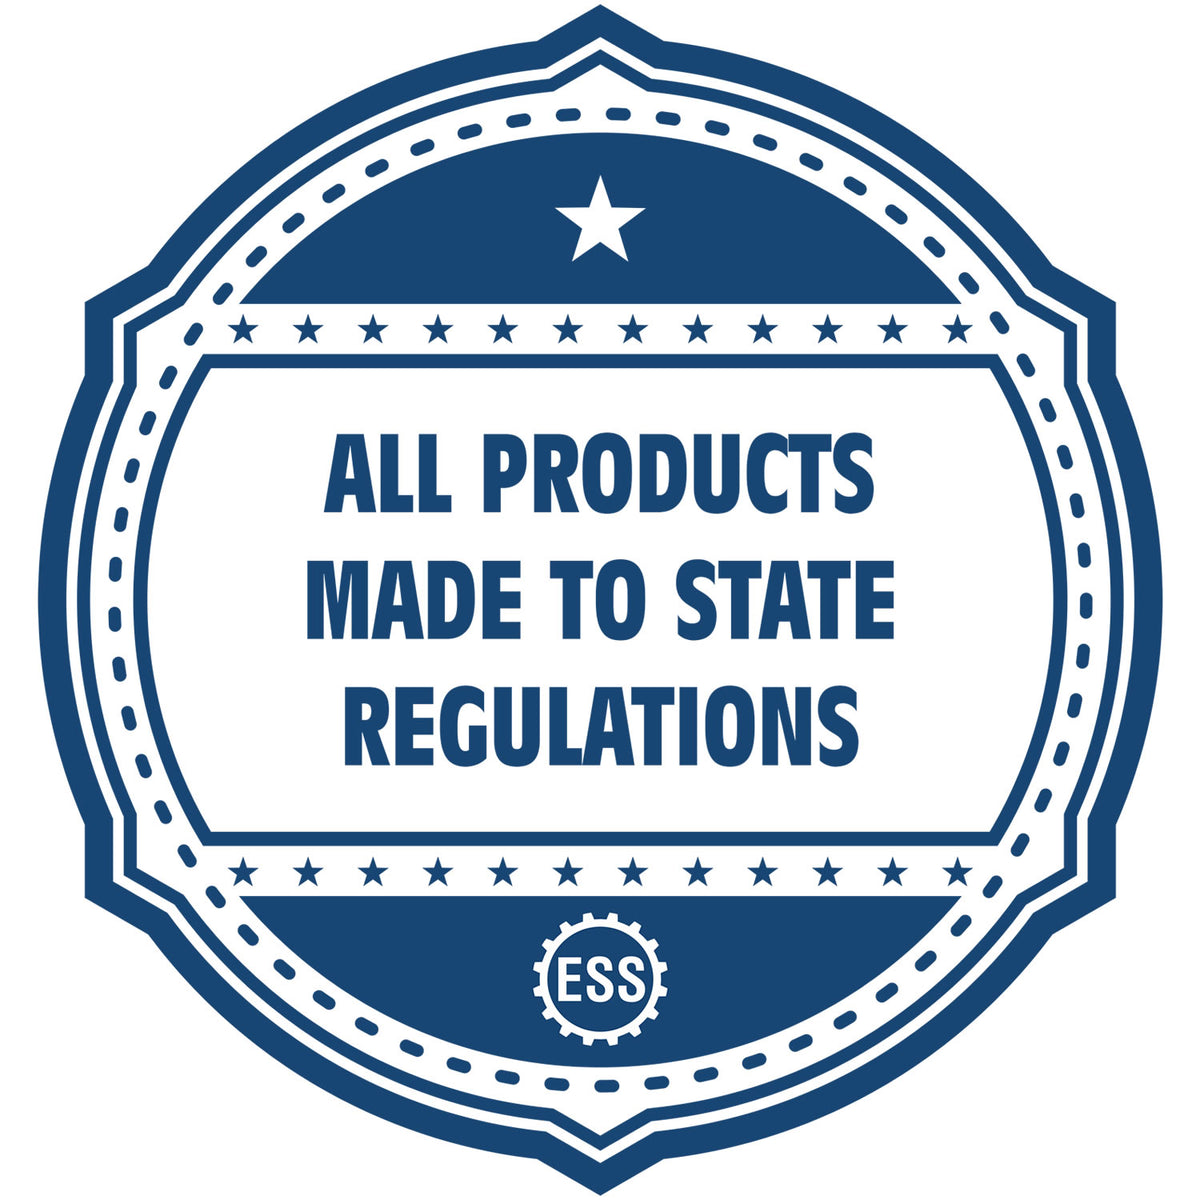 A blue icon or badge for the Gift Maine Land Surveyor Seal showing that this product is made in compliance with state regulations.